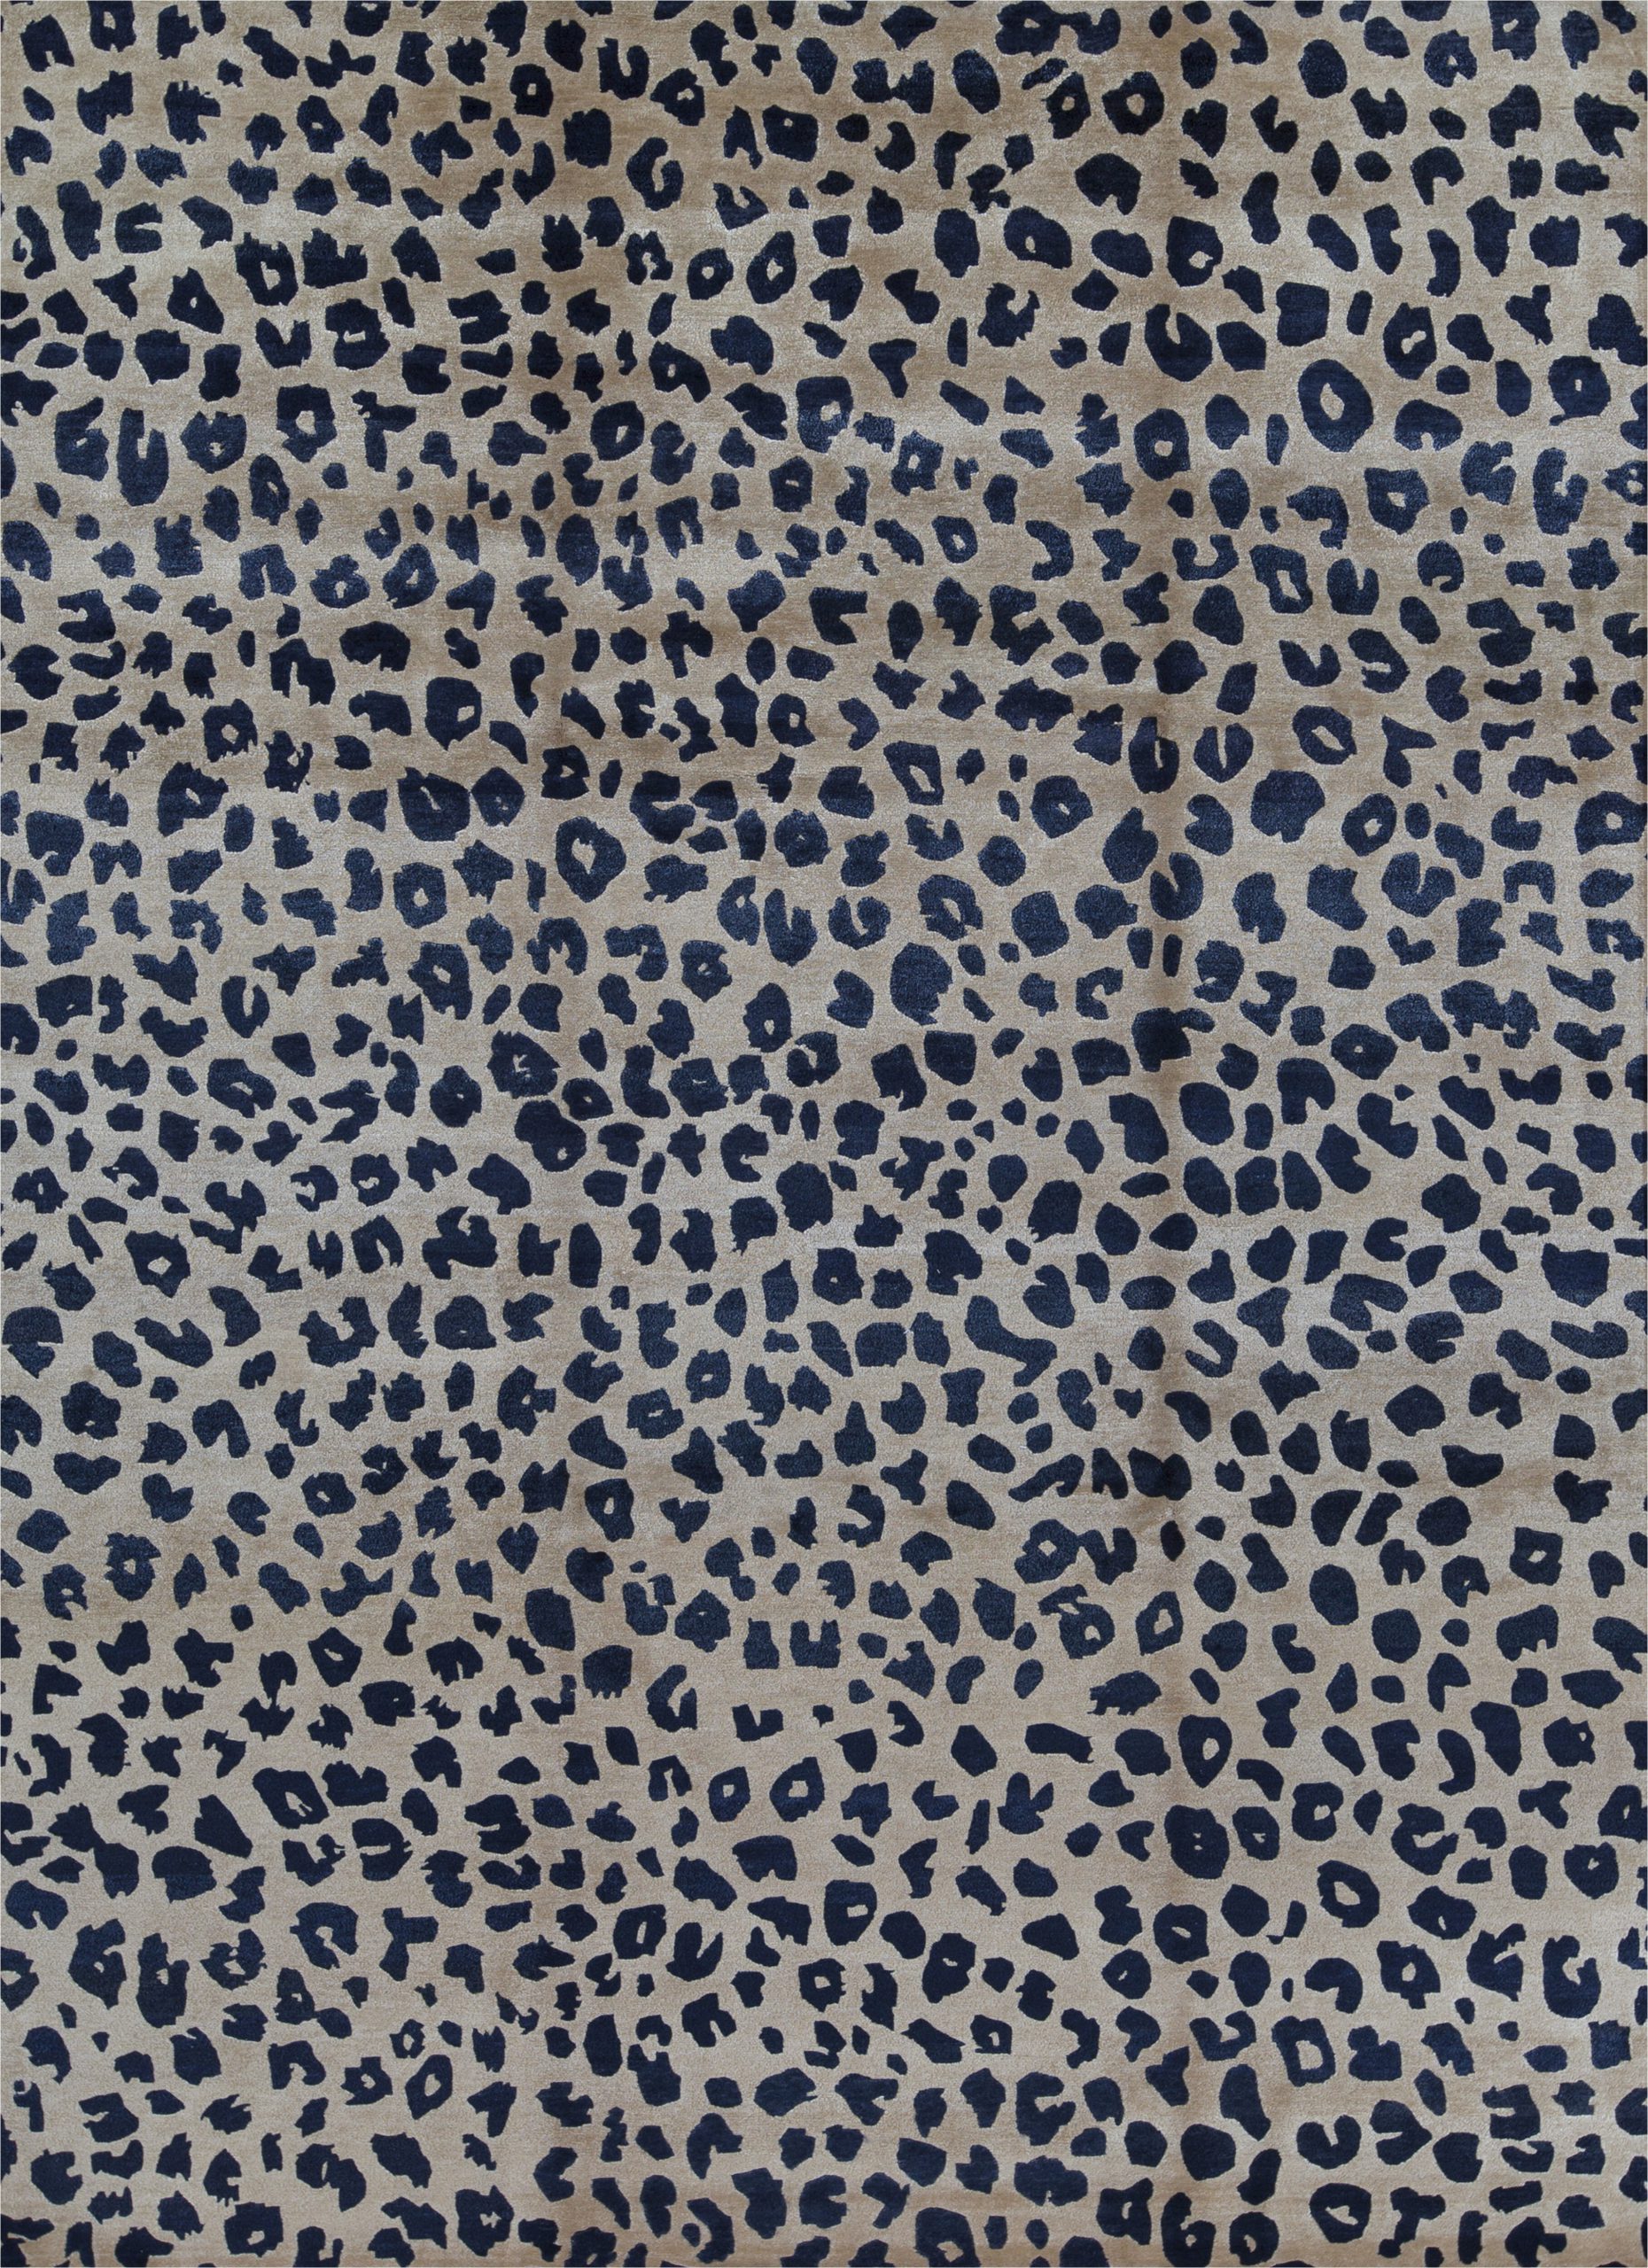 Blue Leopard Print Rug Animal Print Hand Knotted Wool Beige Navy area Rug